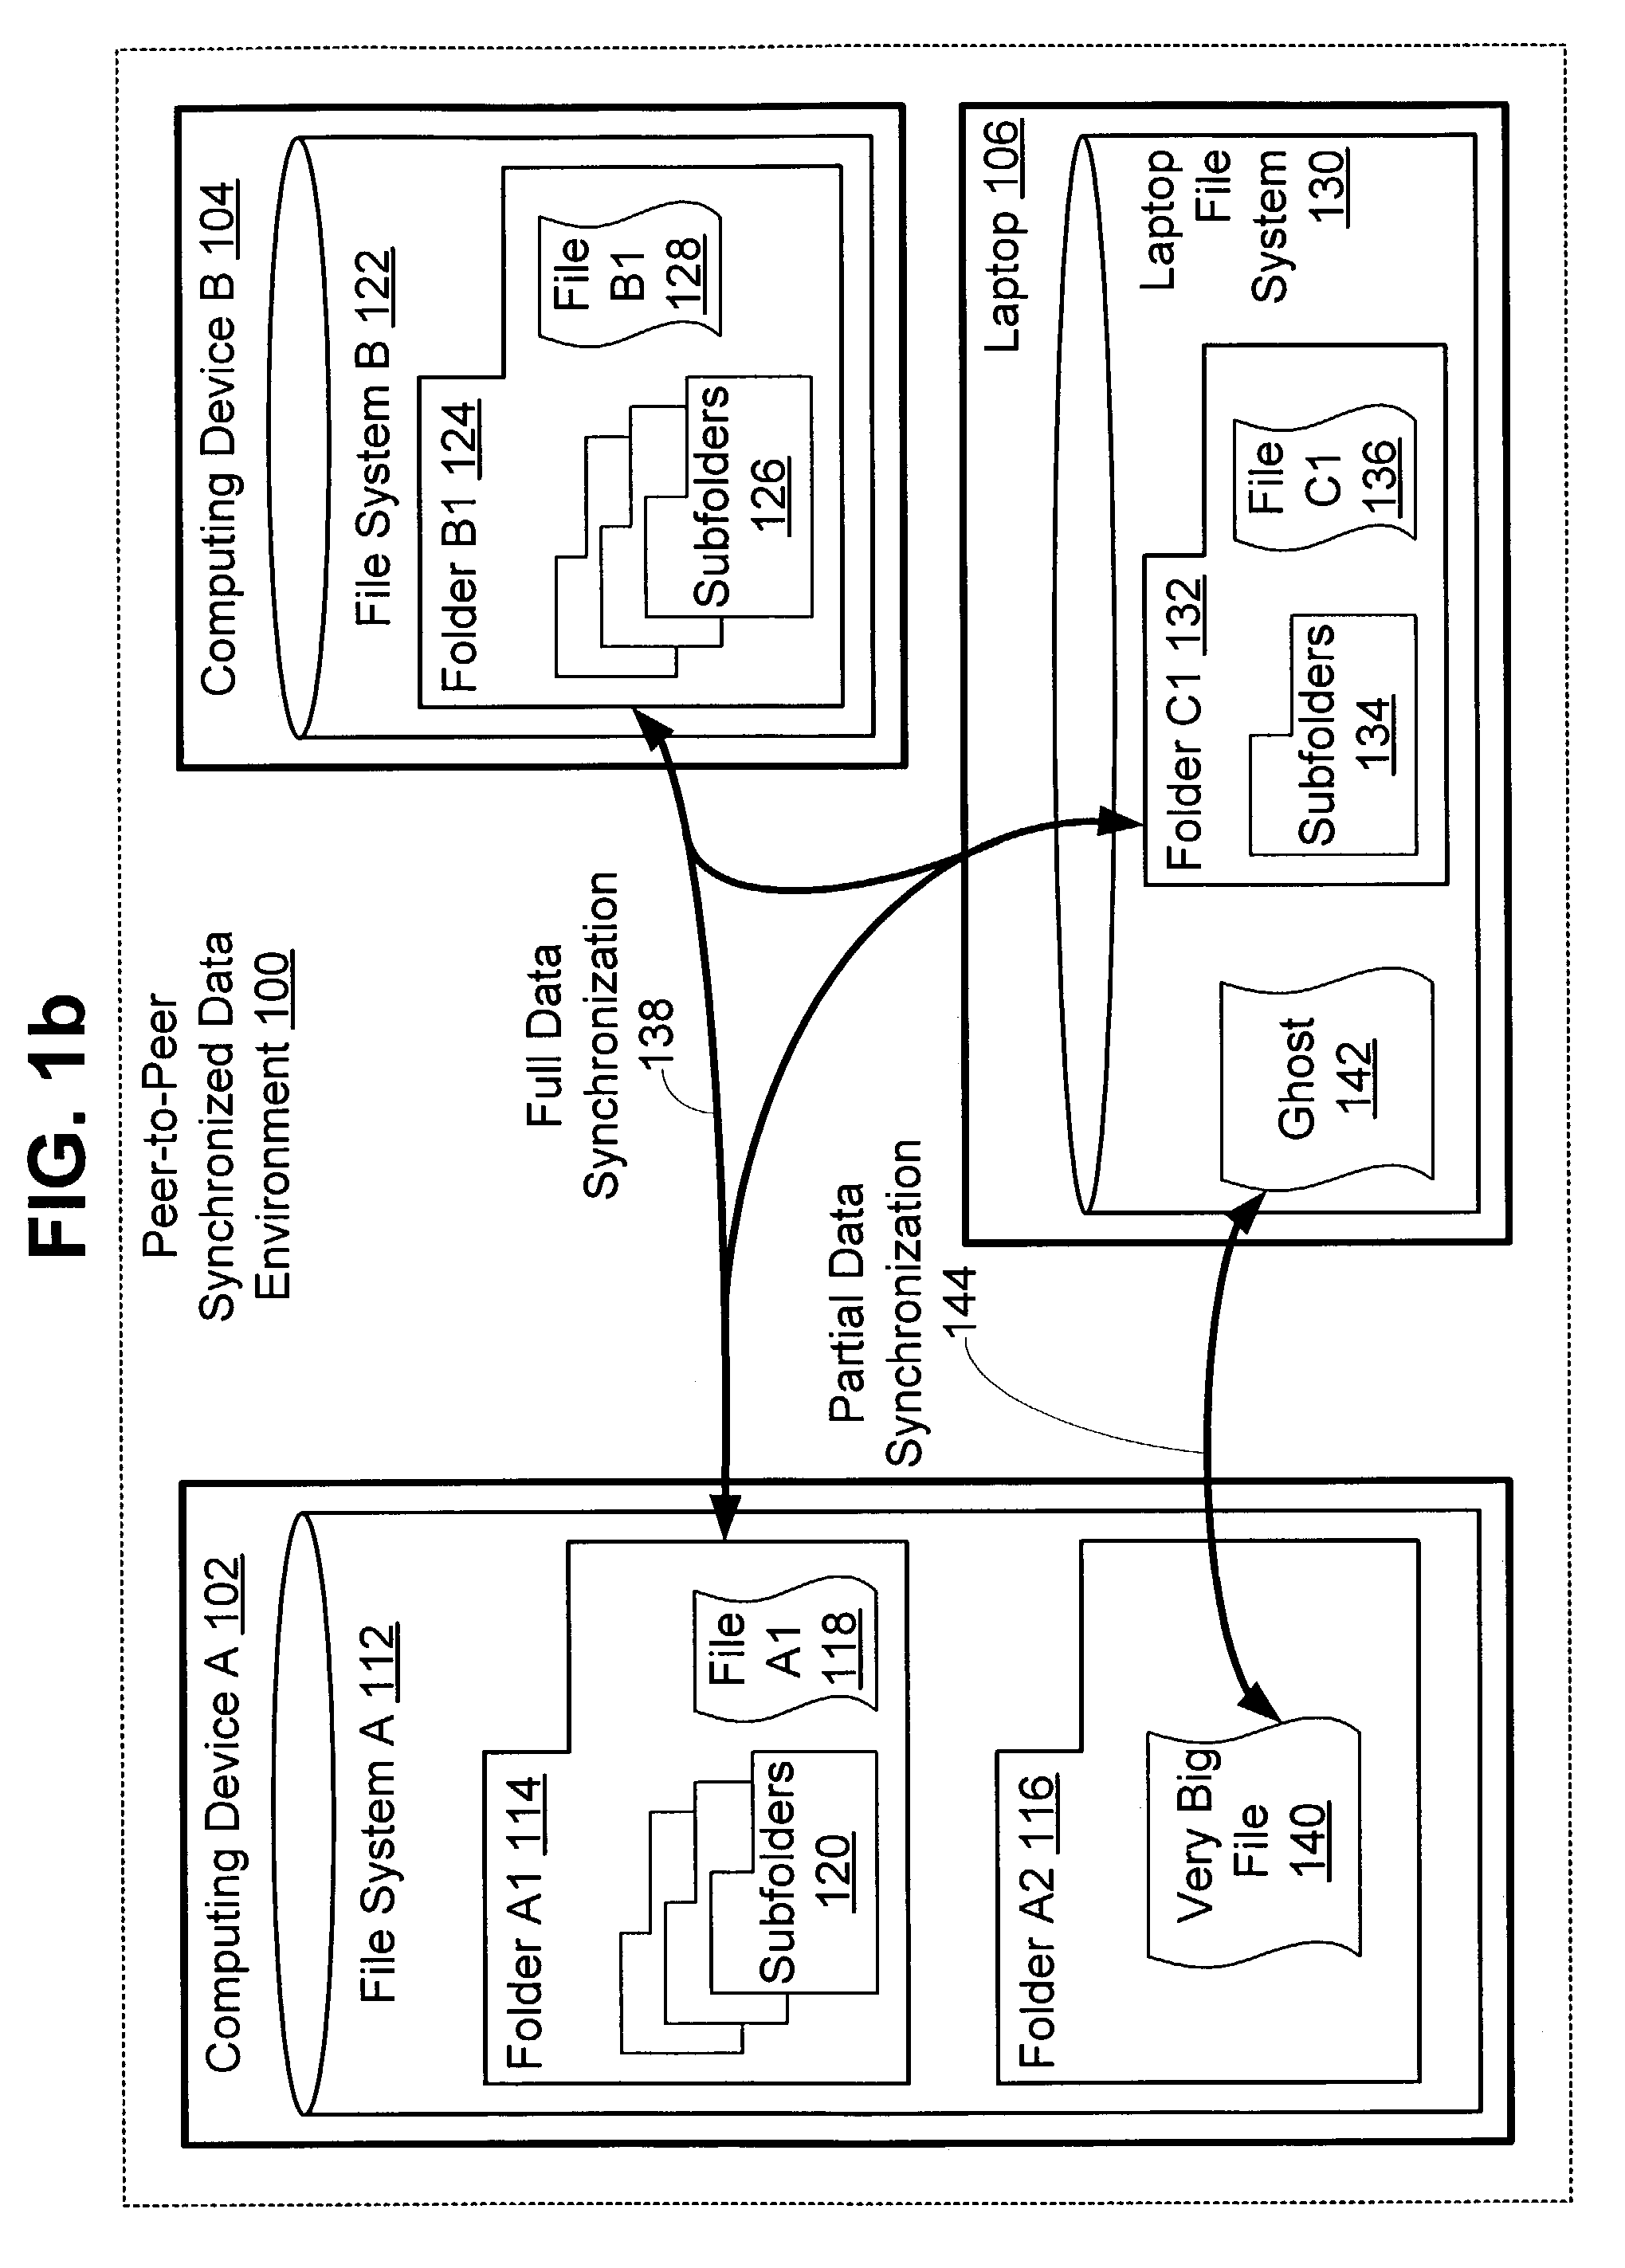 Method and system for synchronizing data shared among peer computing devices